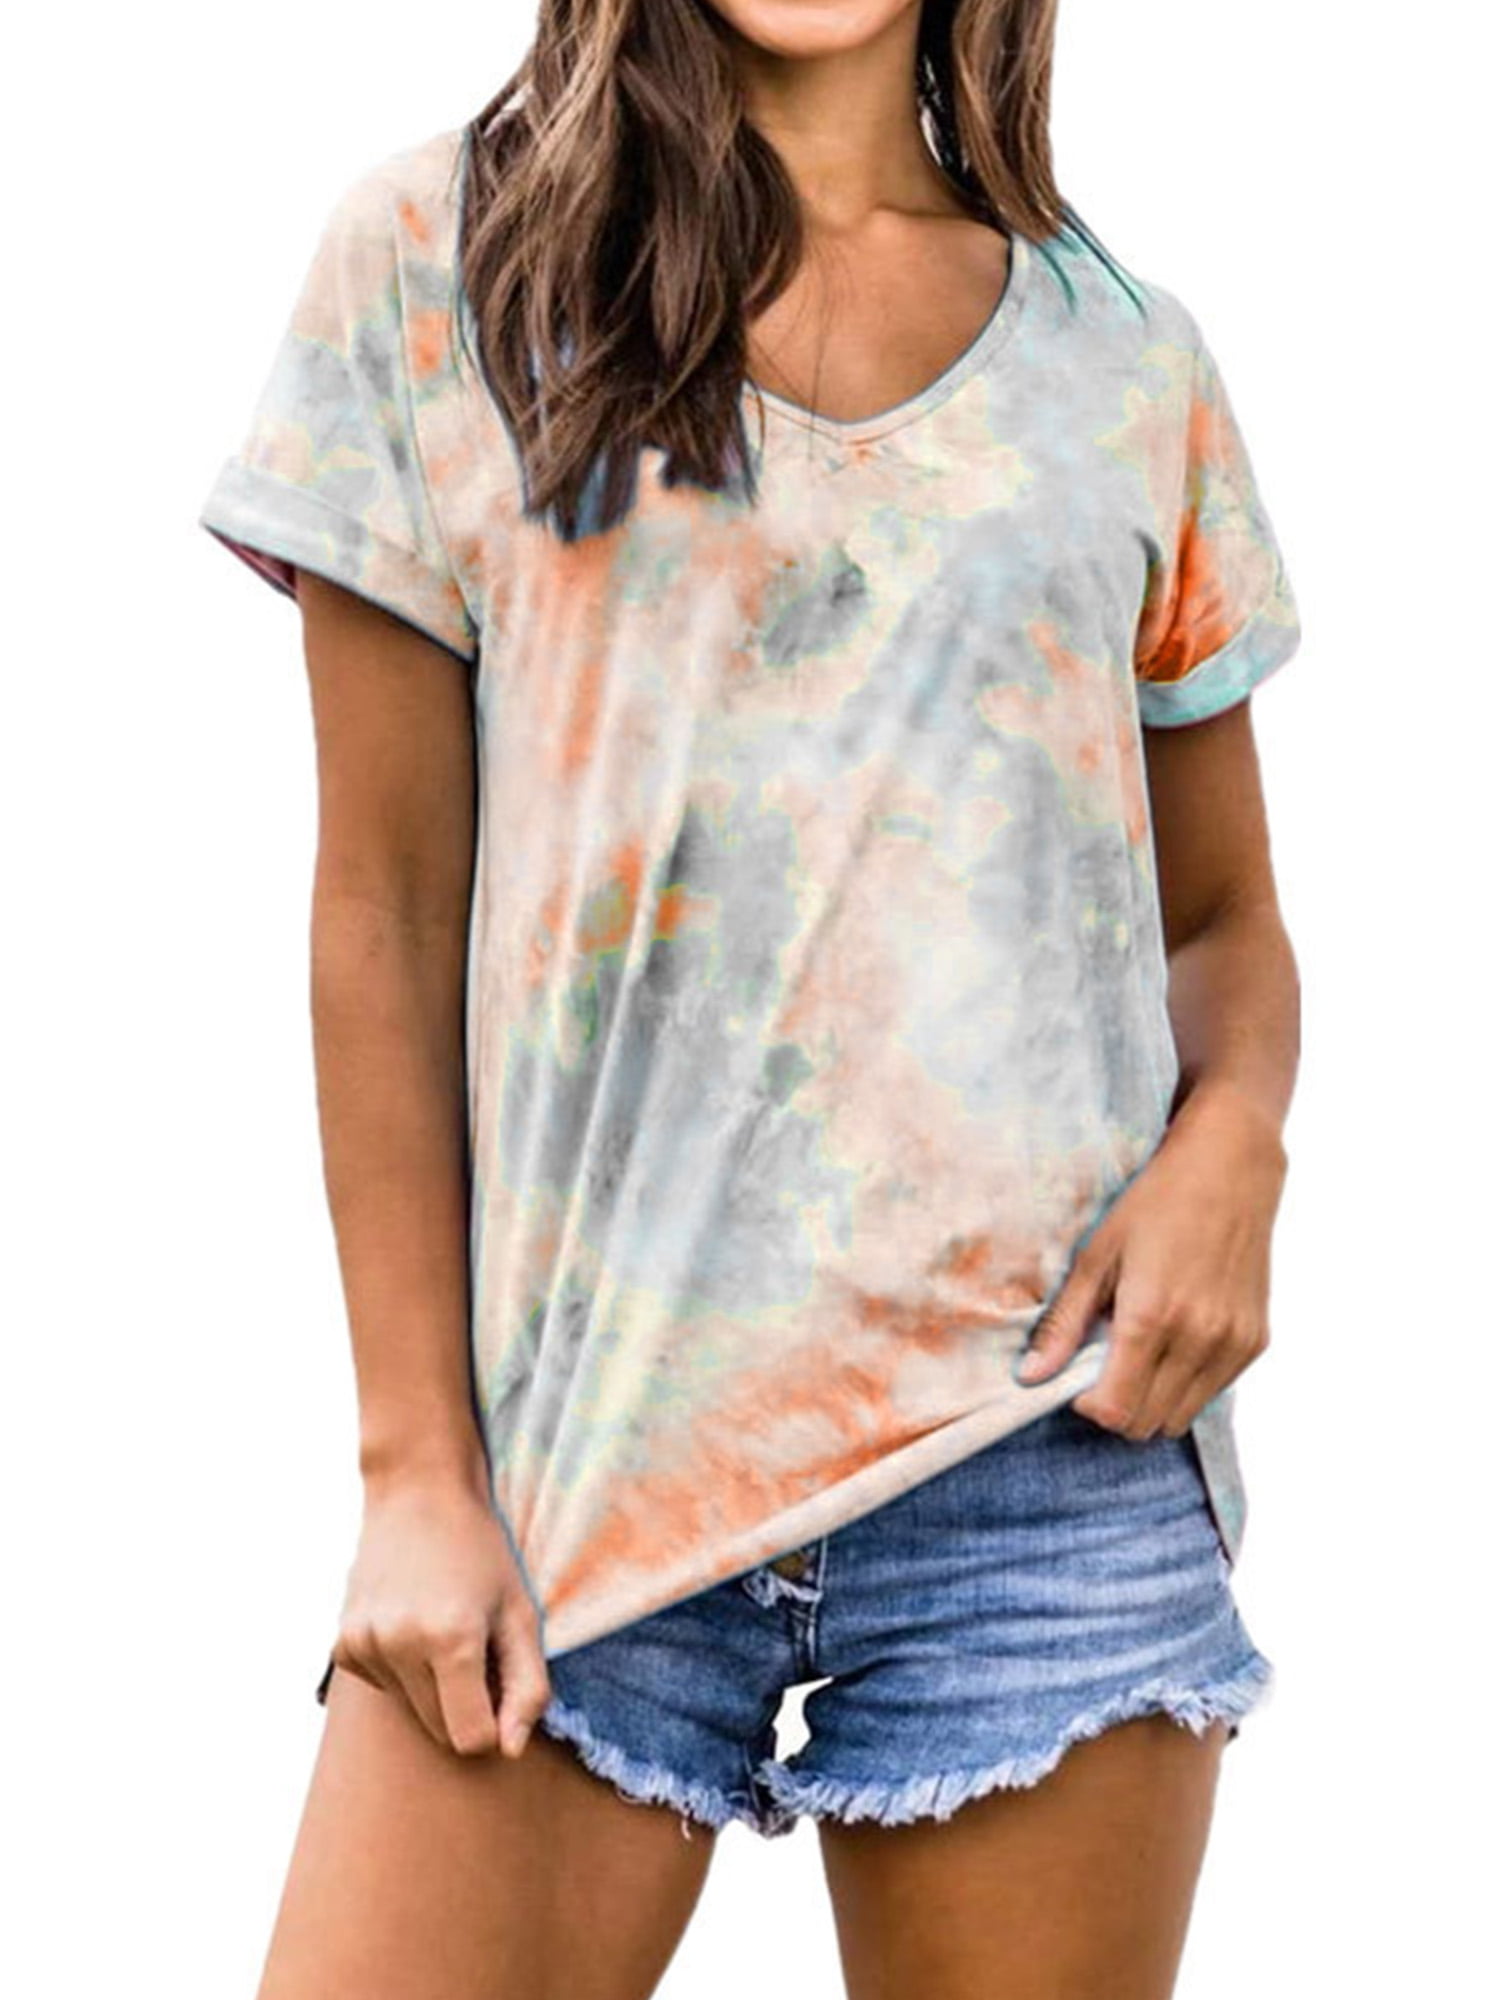 Kansopa Gradient Color Printing Tie Dyeing Skin-Friendly Fashion Casual O-Neck Women Long Sleeve T-Shirt Blouses